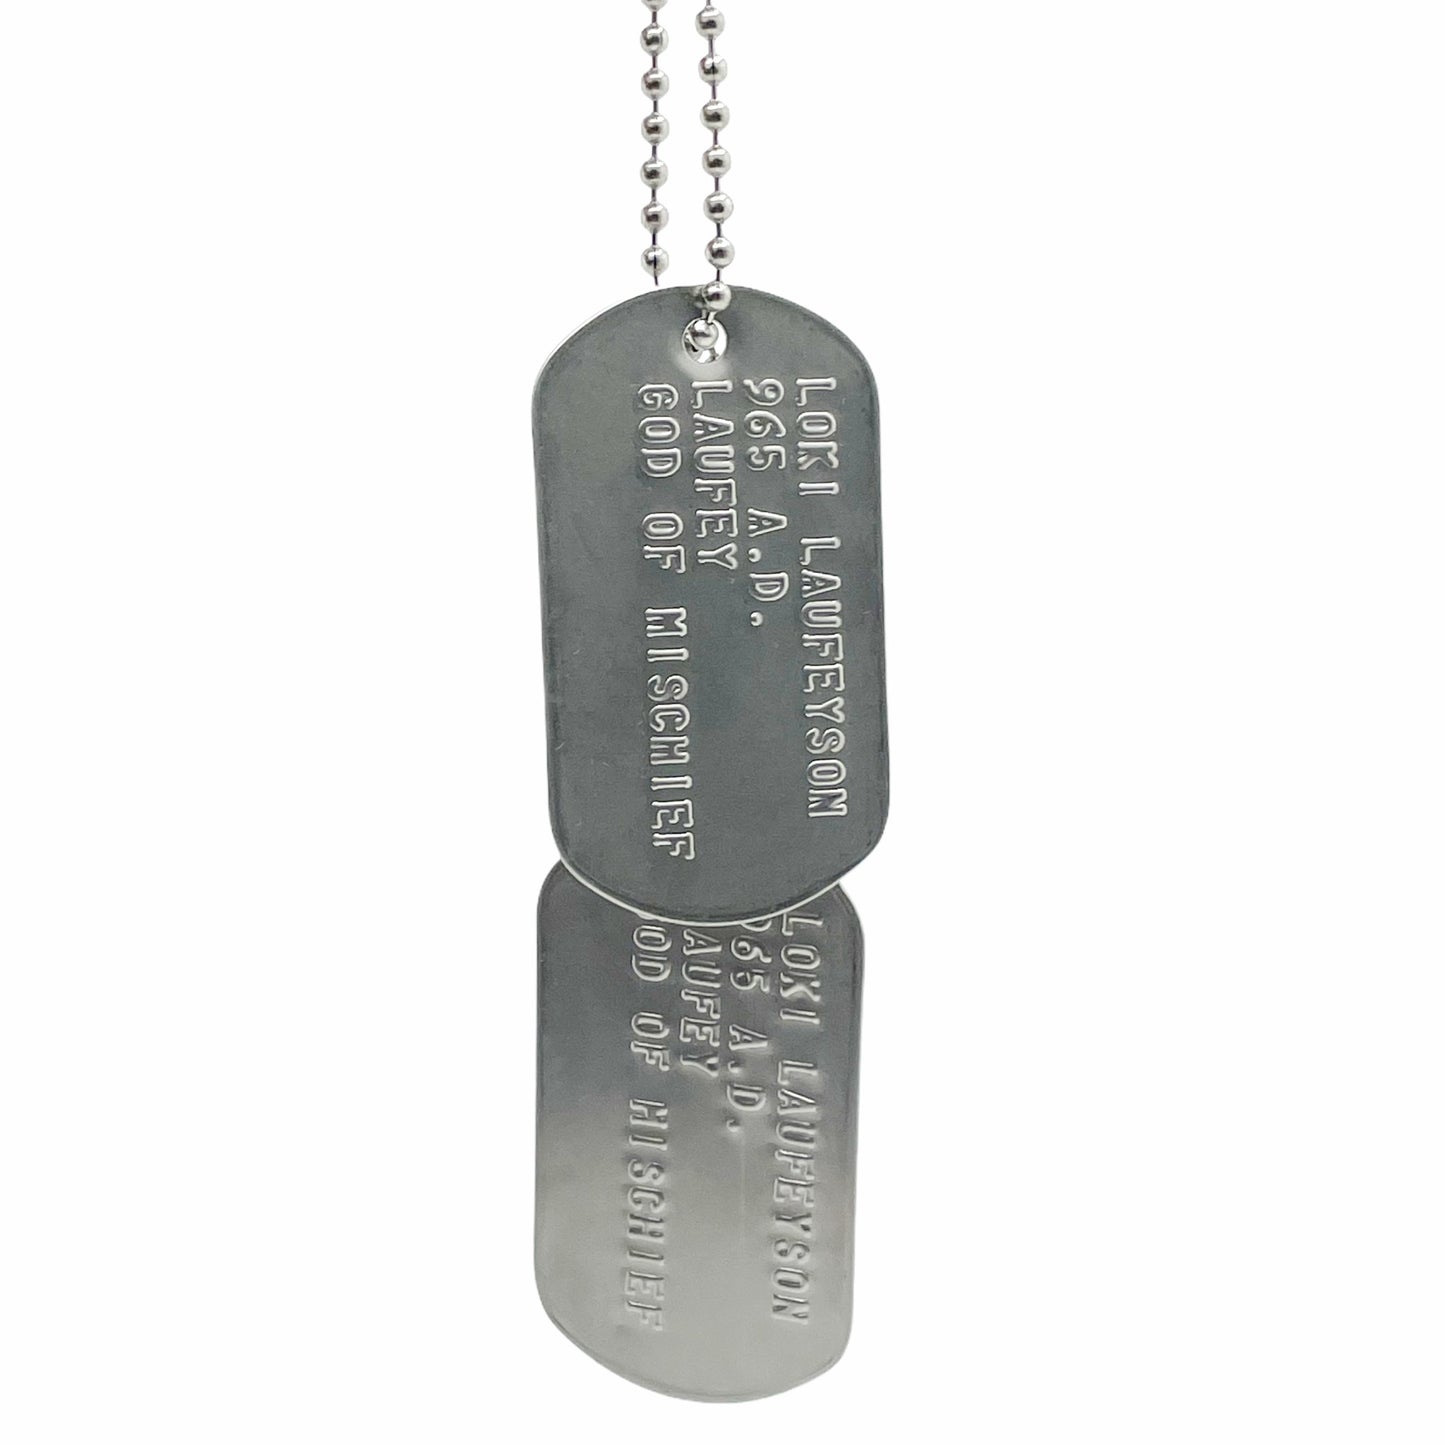 'GOD OF MISCHIEF' LOKI Military Dog Tags - Cosplay Costume Prop Replica - Stainless Steel Chains Included - TheDogTagCo